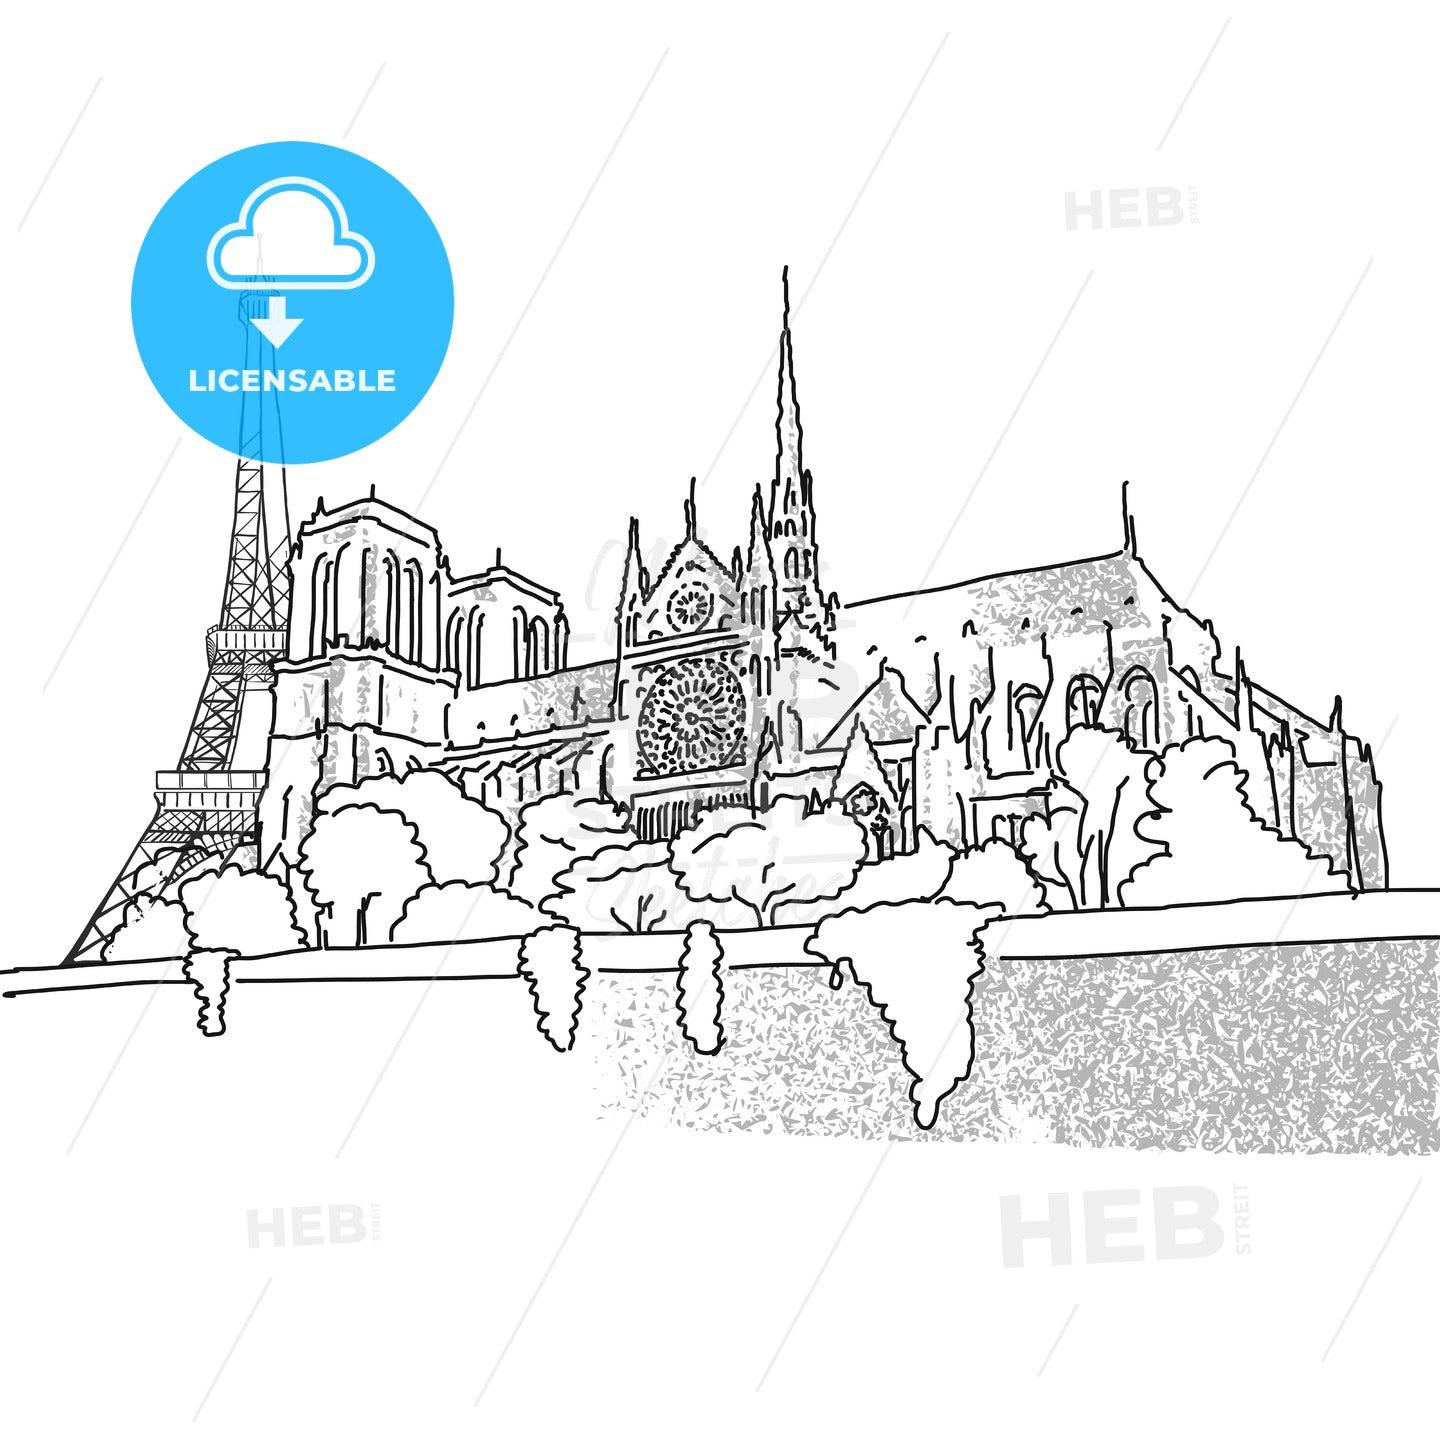 Notre Dame and Eiffel Tower travel scene – instant download